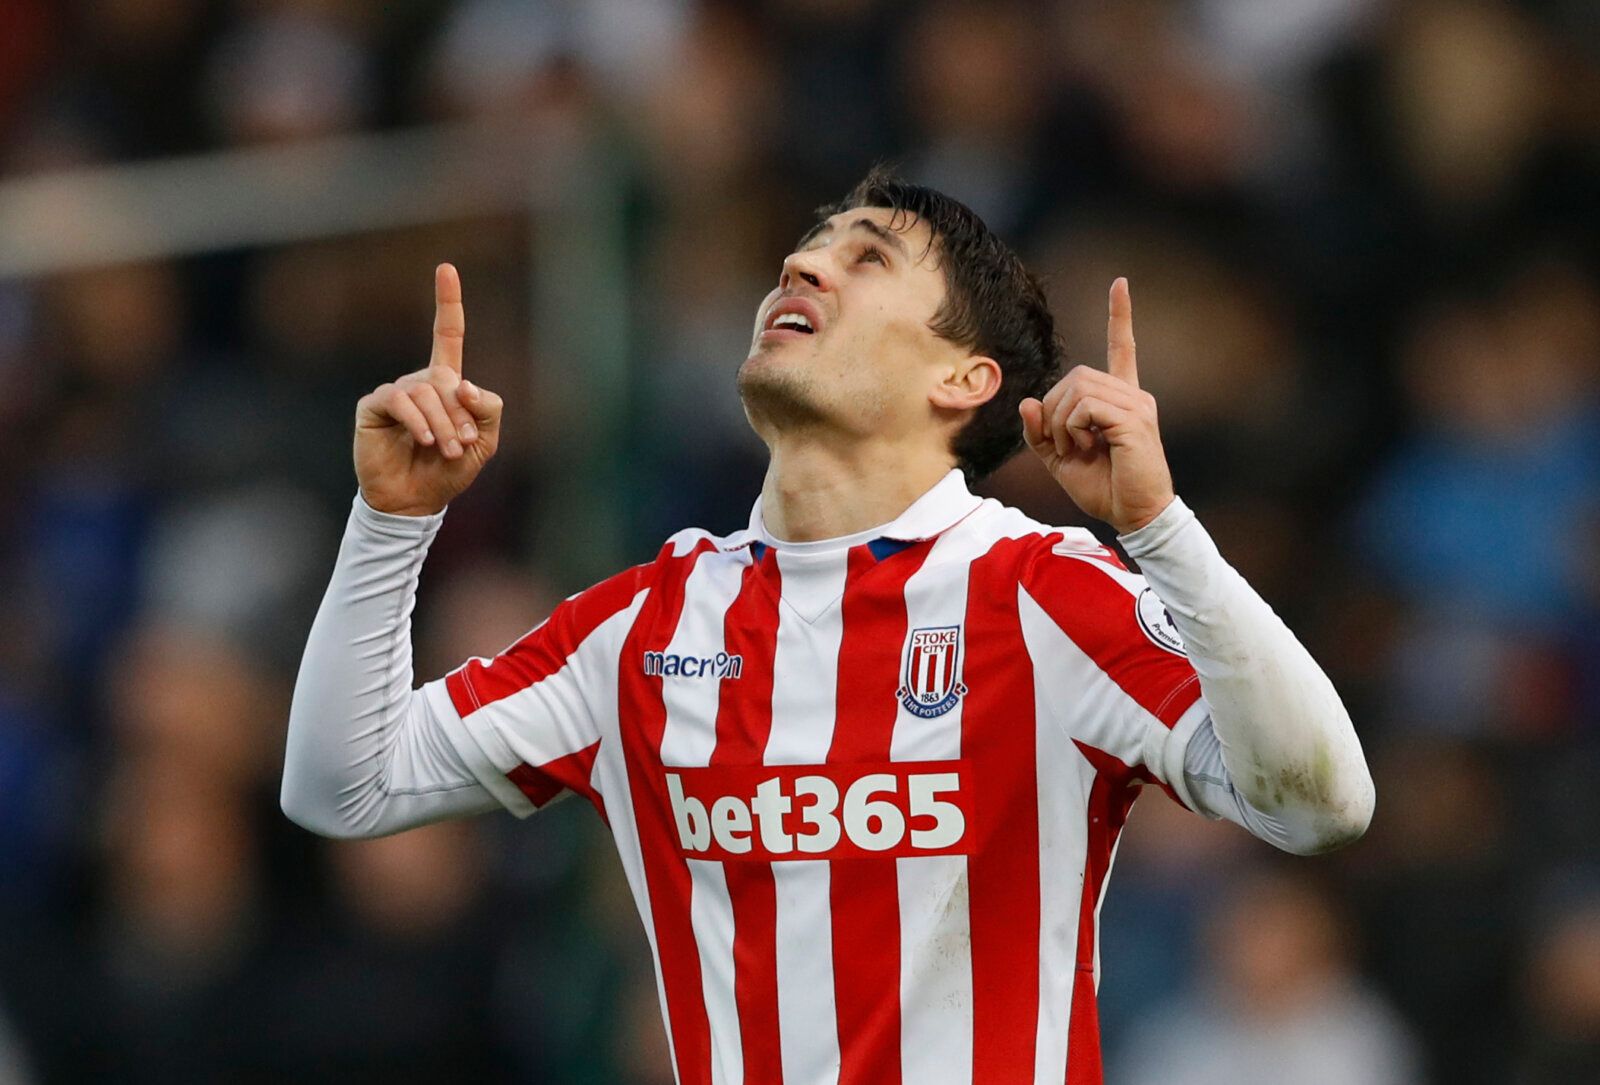 Britain Football Soccer - Stoke City v Leicester City - Premier League - bet365 Stadium - 17/12/16 Stoke City's Bojan Krkic celebrates scoring their first goal  Action Images via Reuters / Carl Recine Livepic EDITORIAL USE ONLY. No use with unauthorized audio, video, data, fixture lists, club/league logos or 